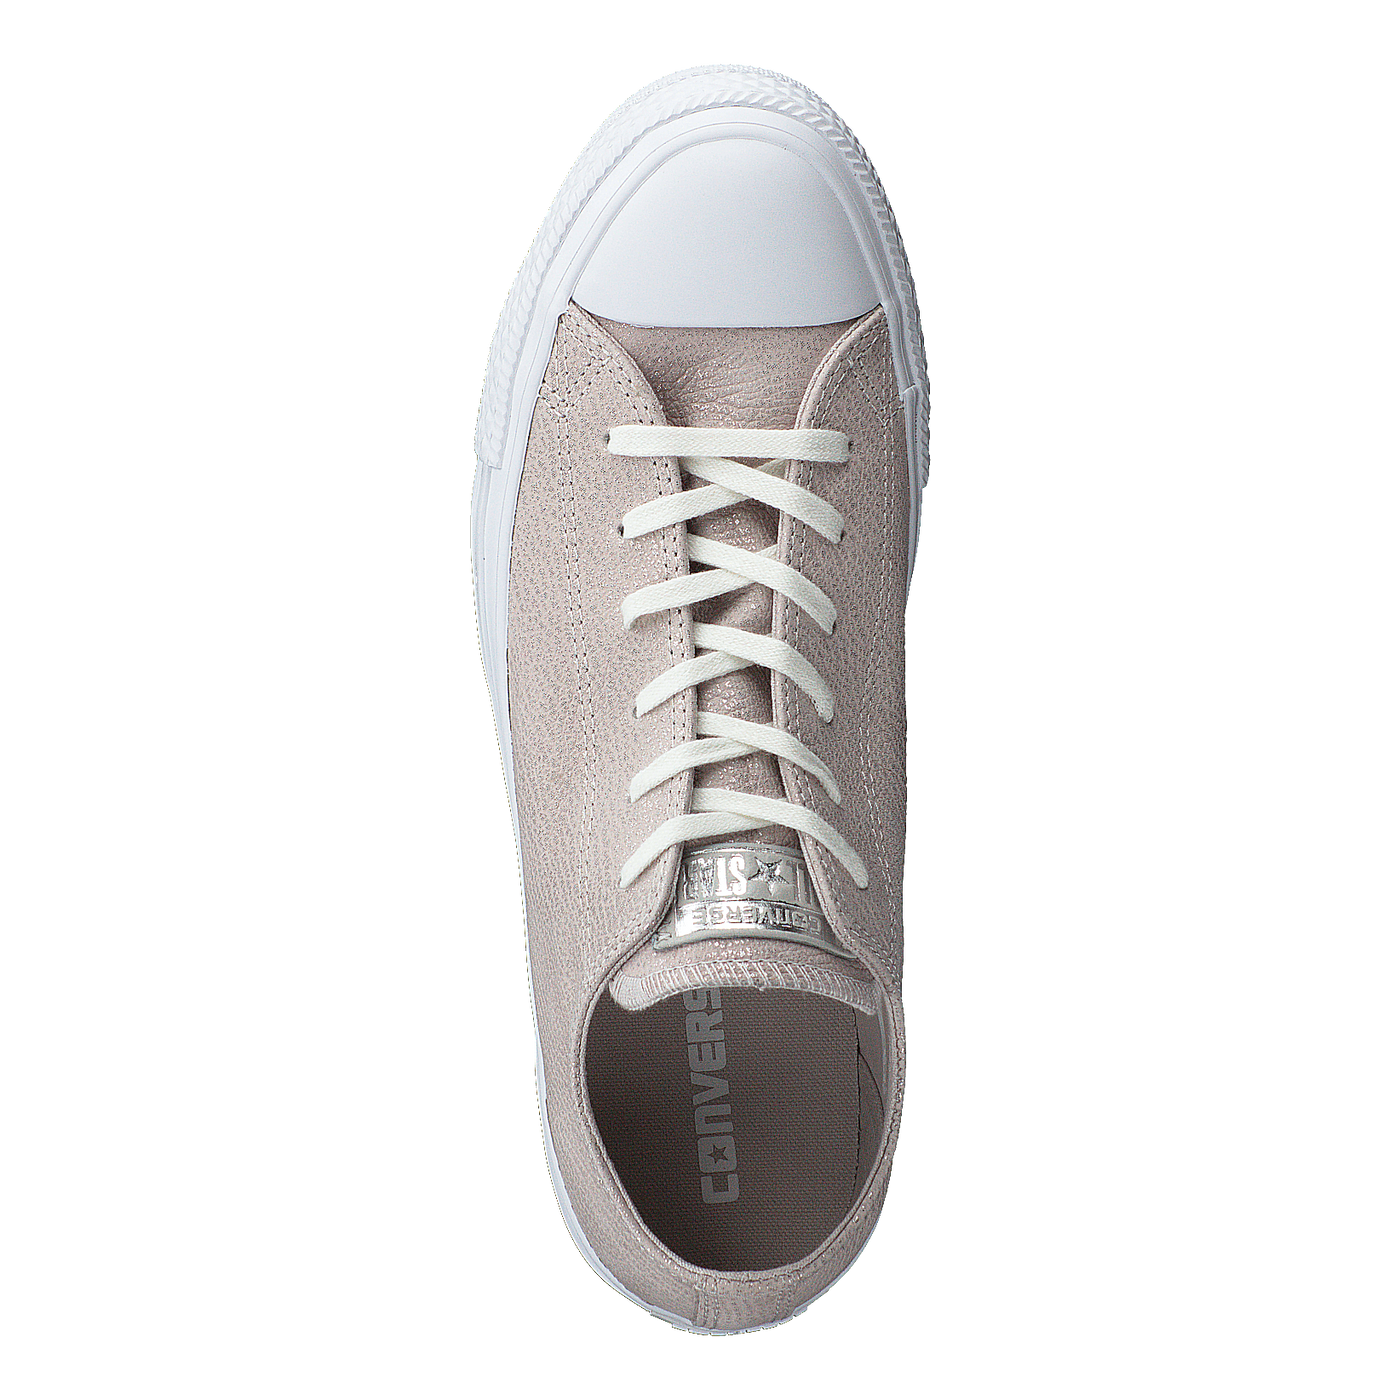 Chuck Taylor All Star Pale Putty/silver/white